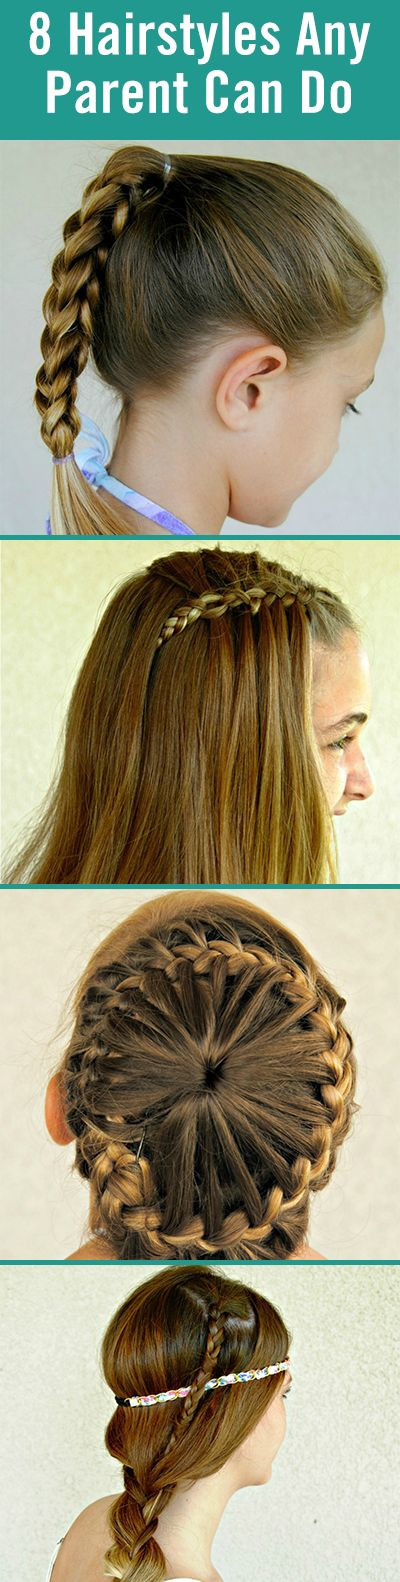 Easy Hairstyles That Kids Can Do
 8 Super Cute Hairstyles Any Parent Can Do Themselves